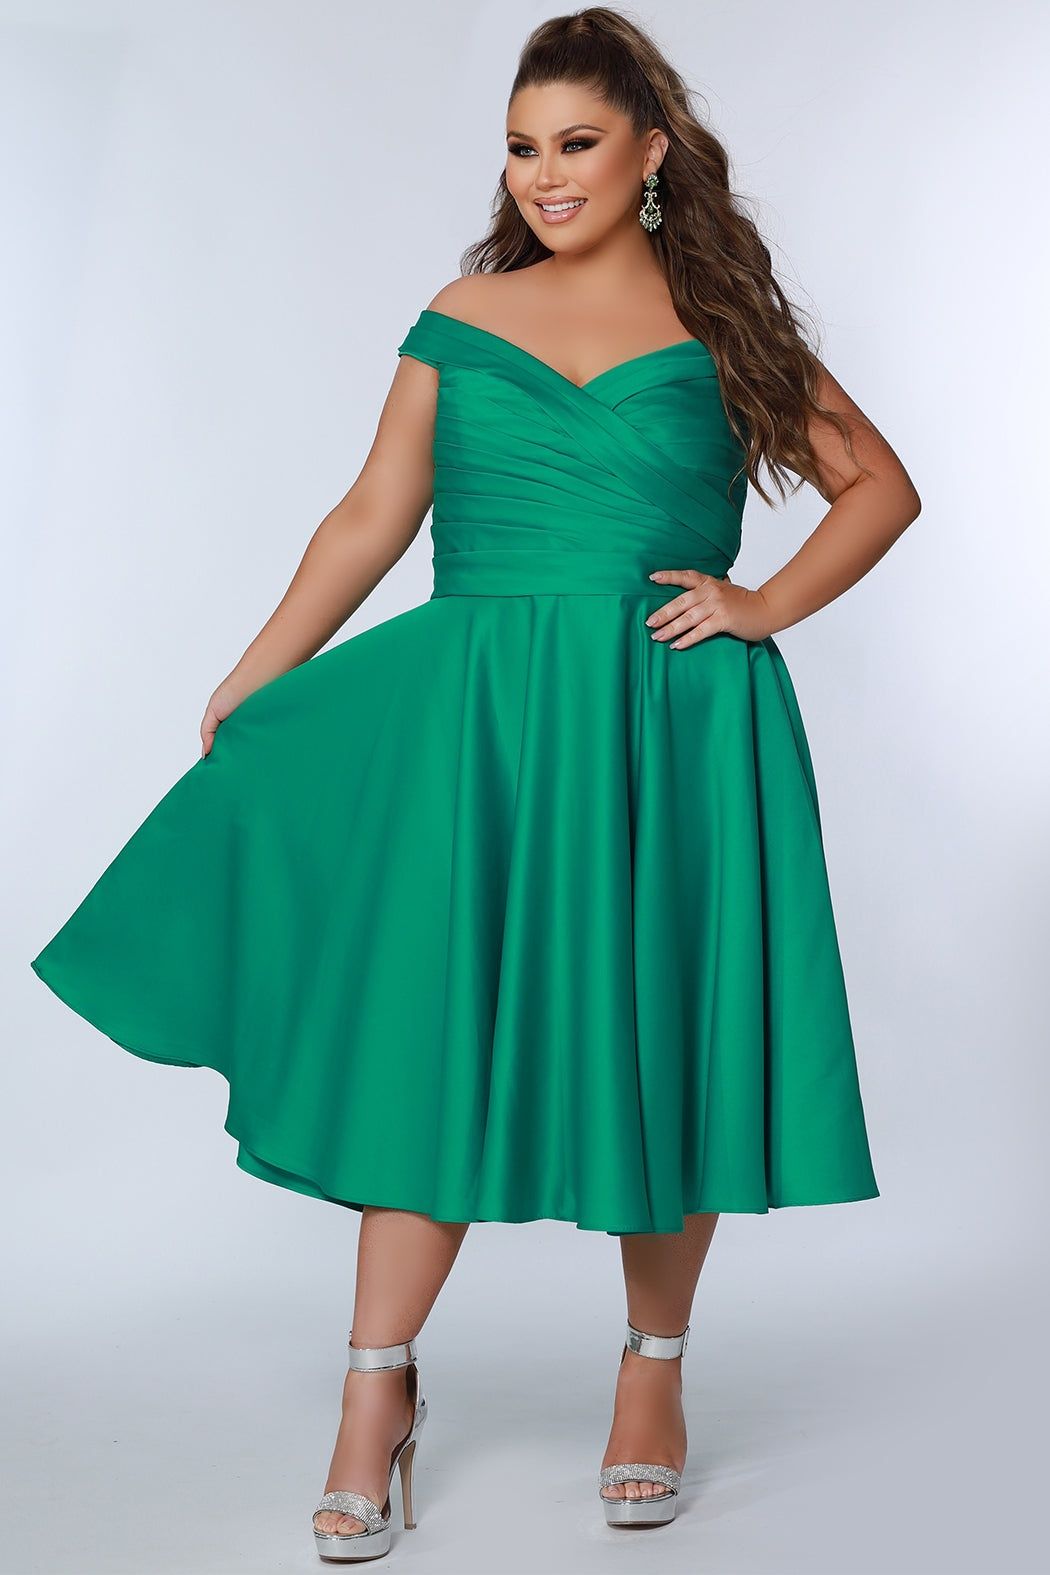 Style CE2301 Sydney's Closet Plus Size 26 Satin Emerald Green Cocktail Dress on Queenly